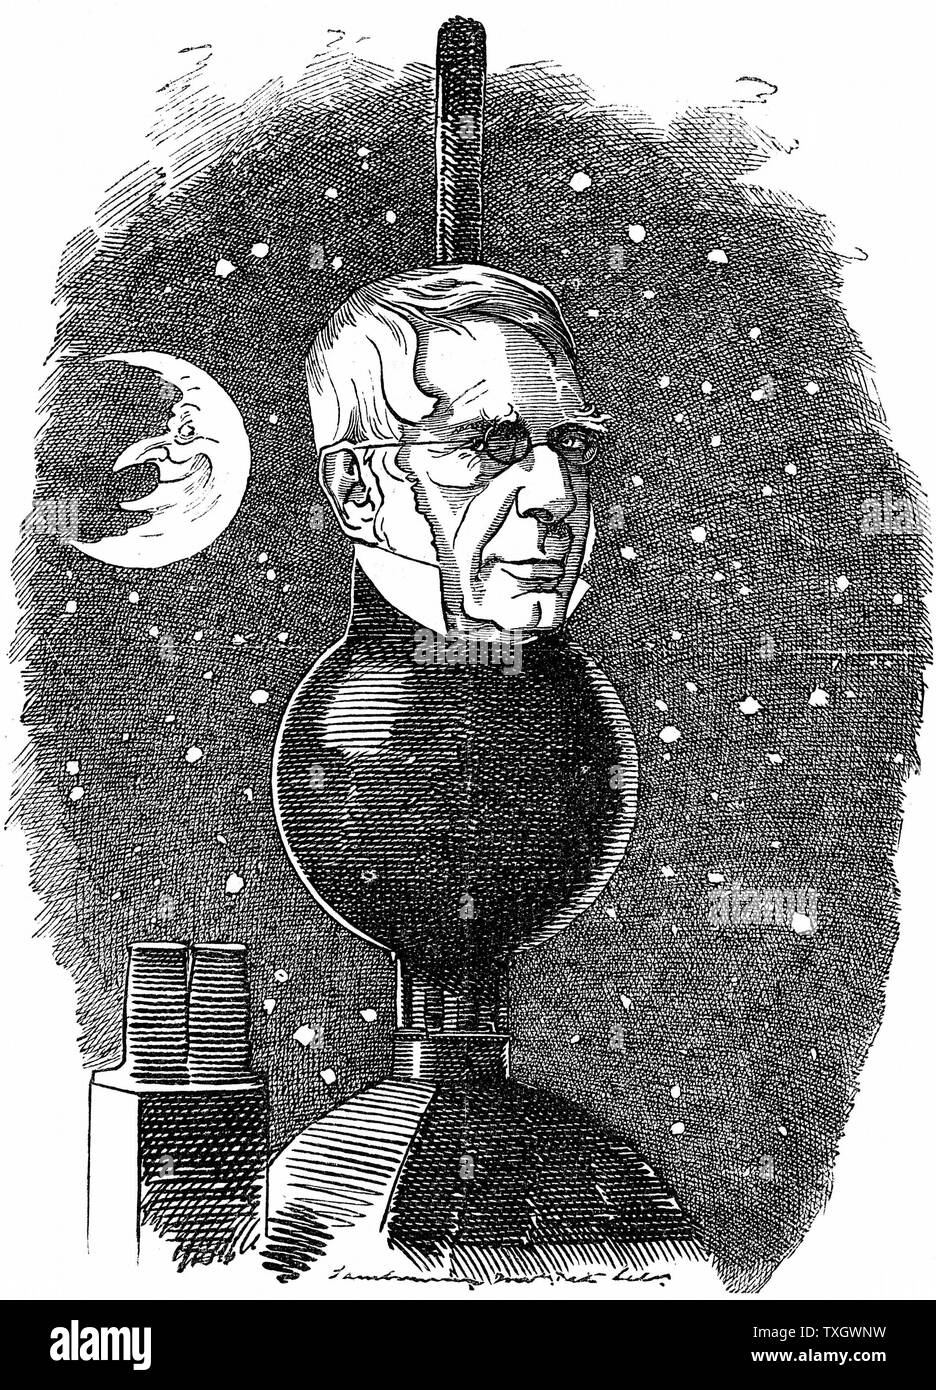 George Biddell Airy (1801-92) English astronomer and geophysicist, Astronomer Royal (1835-1881) Richard Linley Sambourne cartoon in his 'Fancy Portraits' series from 'Punch' showing Airy on turret of Flamsteed House, Greenwich (Royal Greenwich Observatory), his body the time ball which was dropped every day for ships in Greenwich Reach to set their chronometers May 1883  London Stock Photo